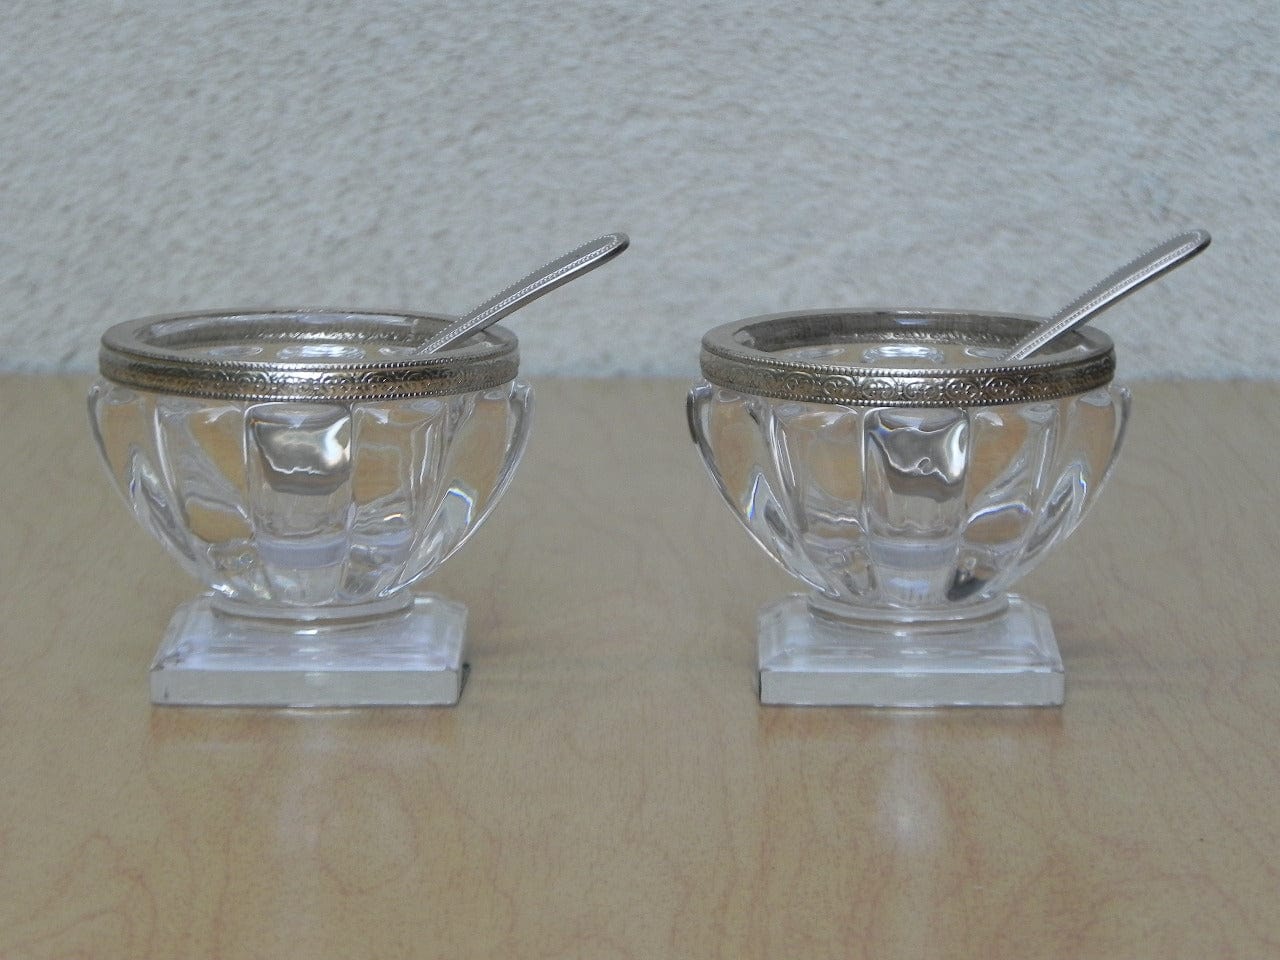 I Like Mike's Mid Century Modern Accessories Pair Crystal Salt Cellar Bowls with Spoons by Godinger for Neiman Marcus